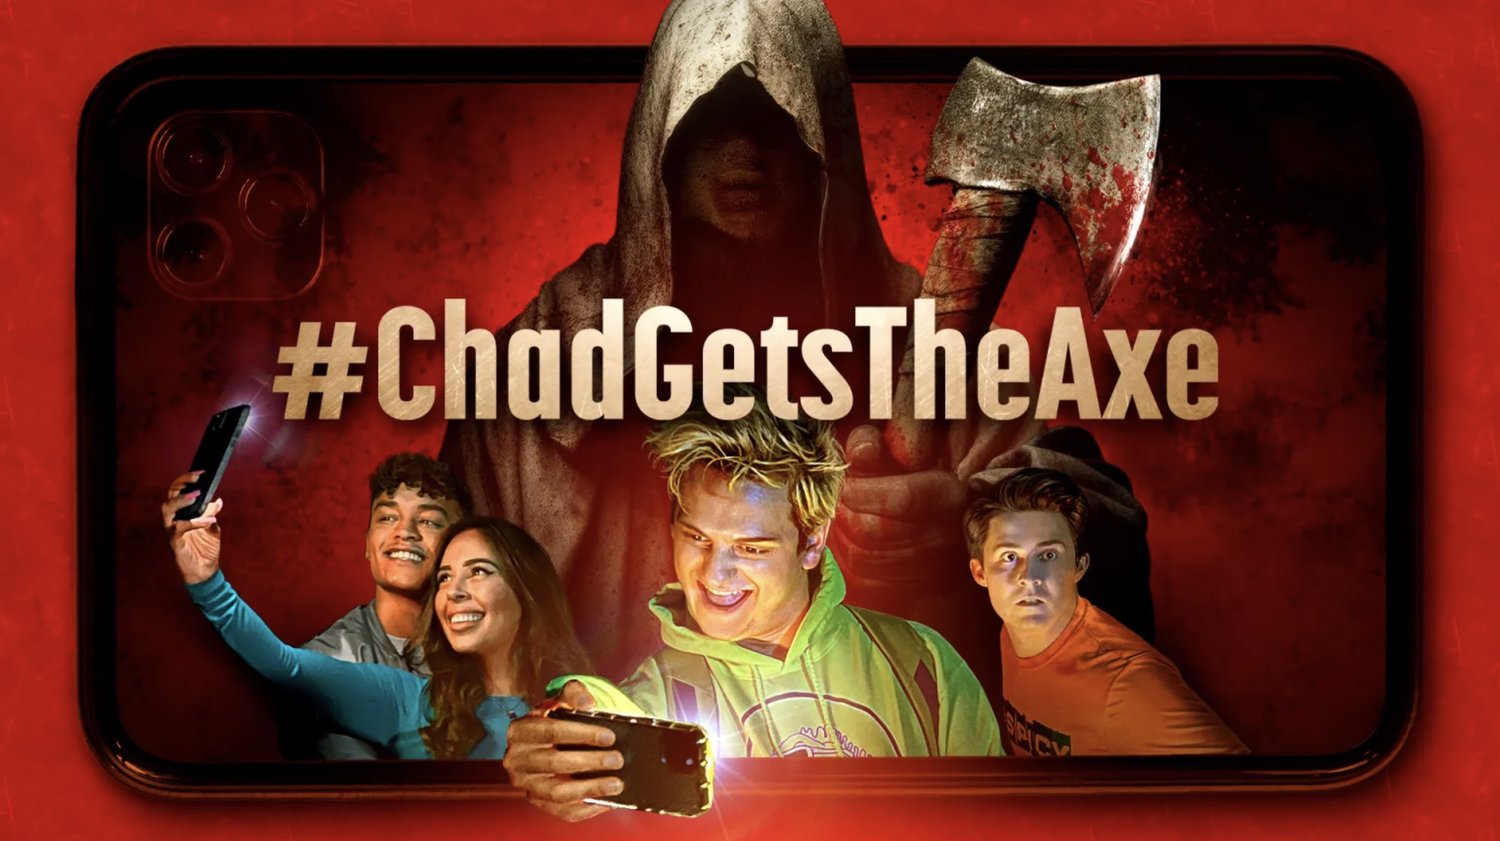 Trailer For The Found Footage Influencer Horror Comedy #ChadGetsTheAxe